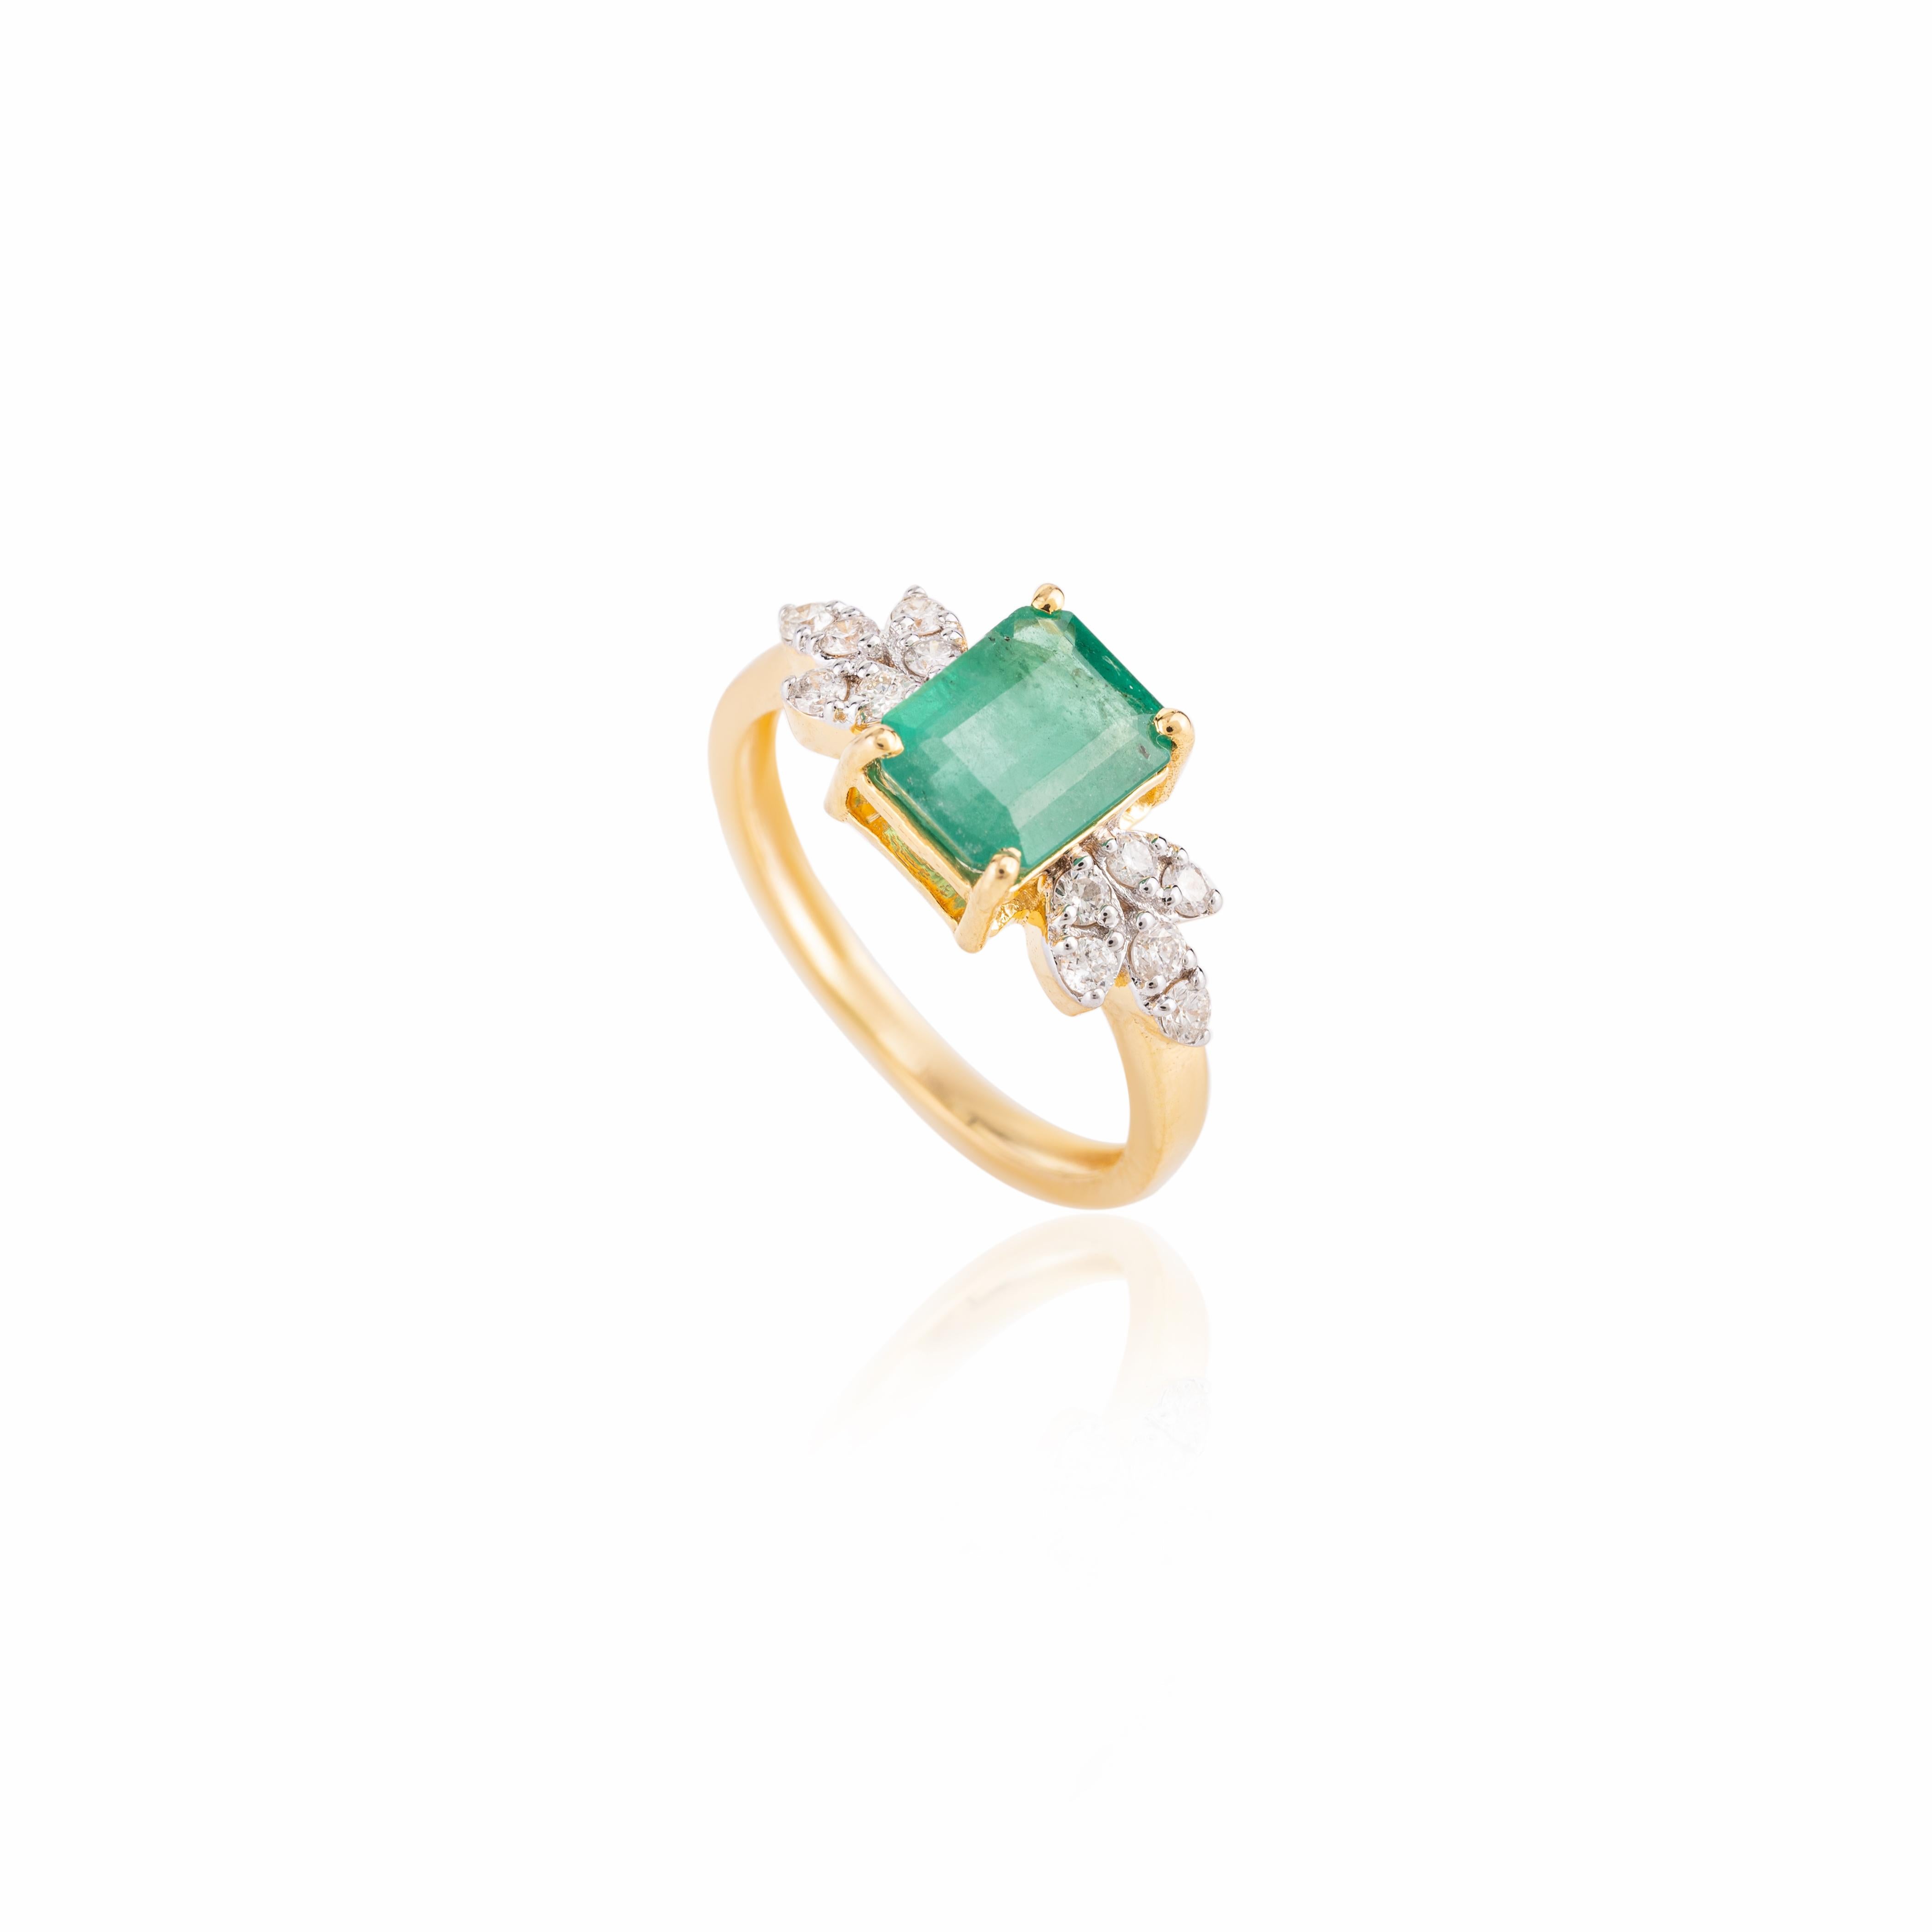 For Sale:  1.34 Carat Octagon Emerald Diamond 14k Yellow Gold Wedding Ring for Her 9